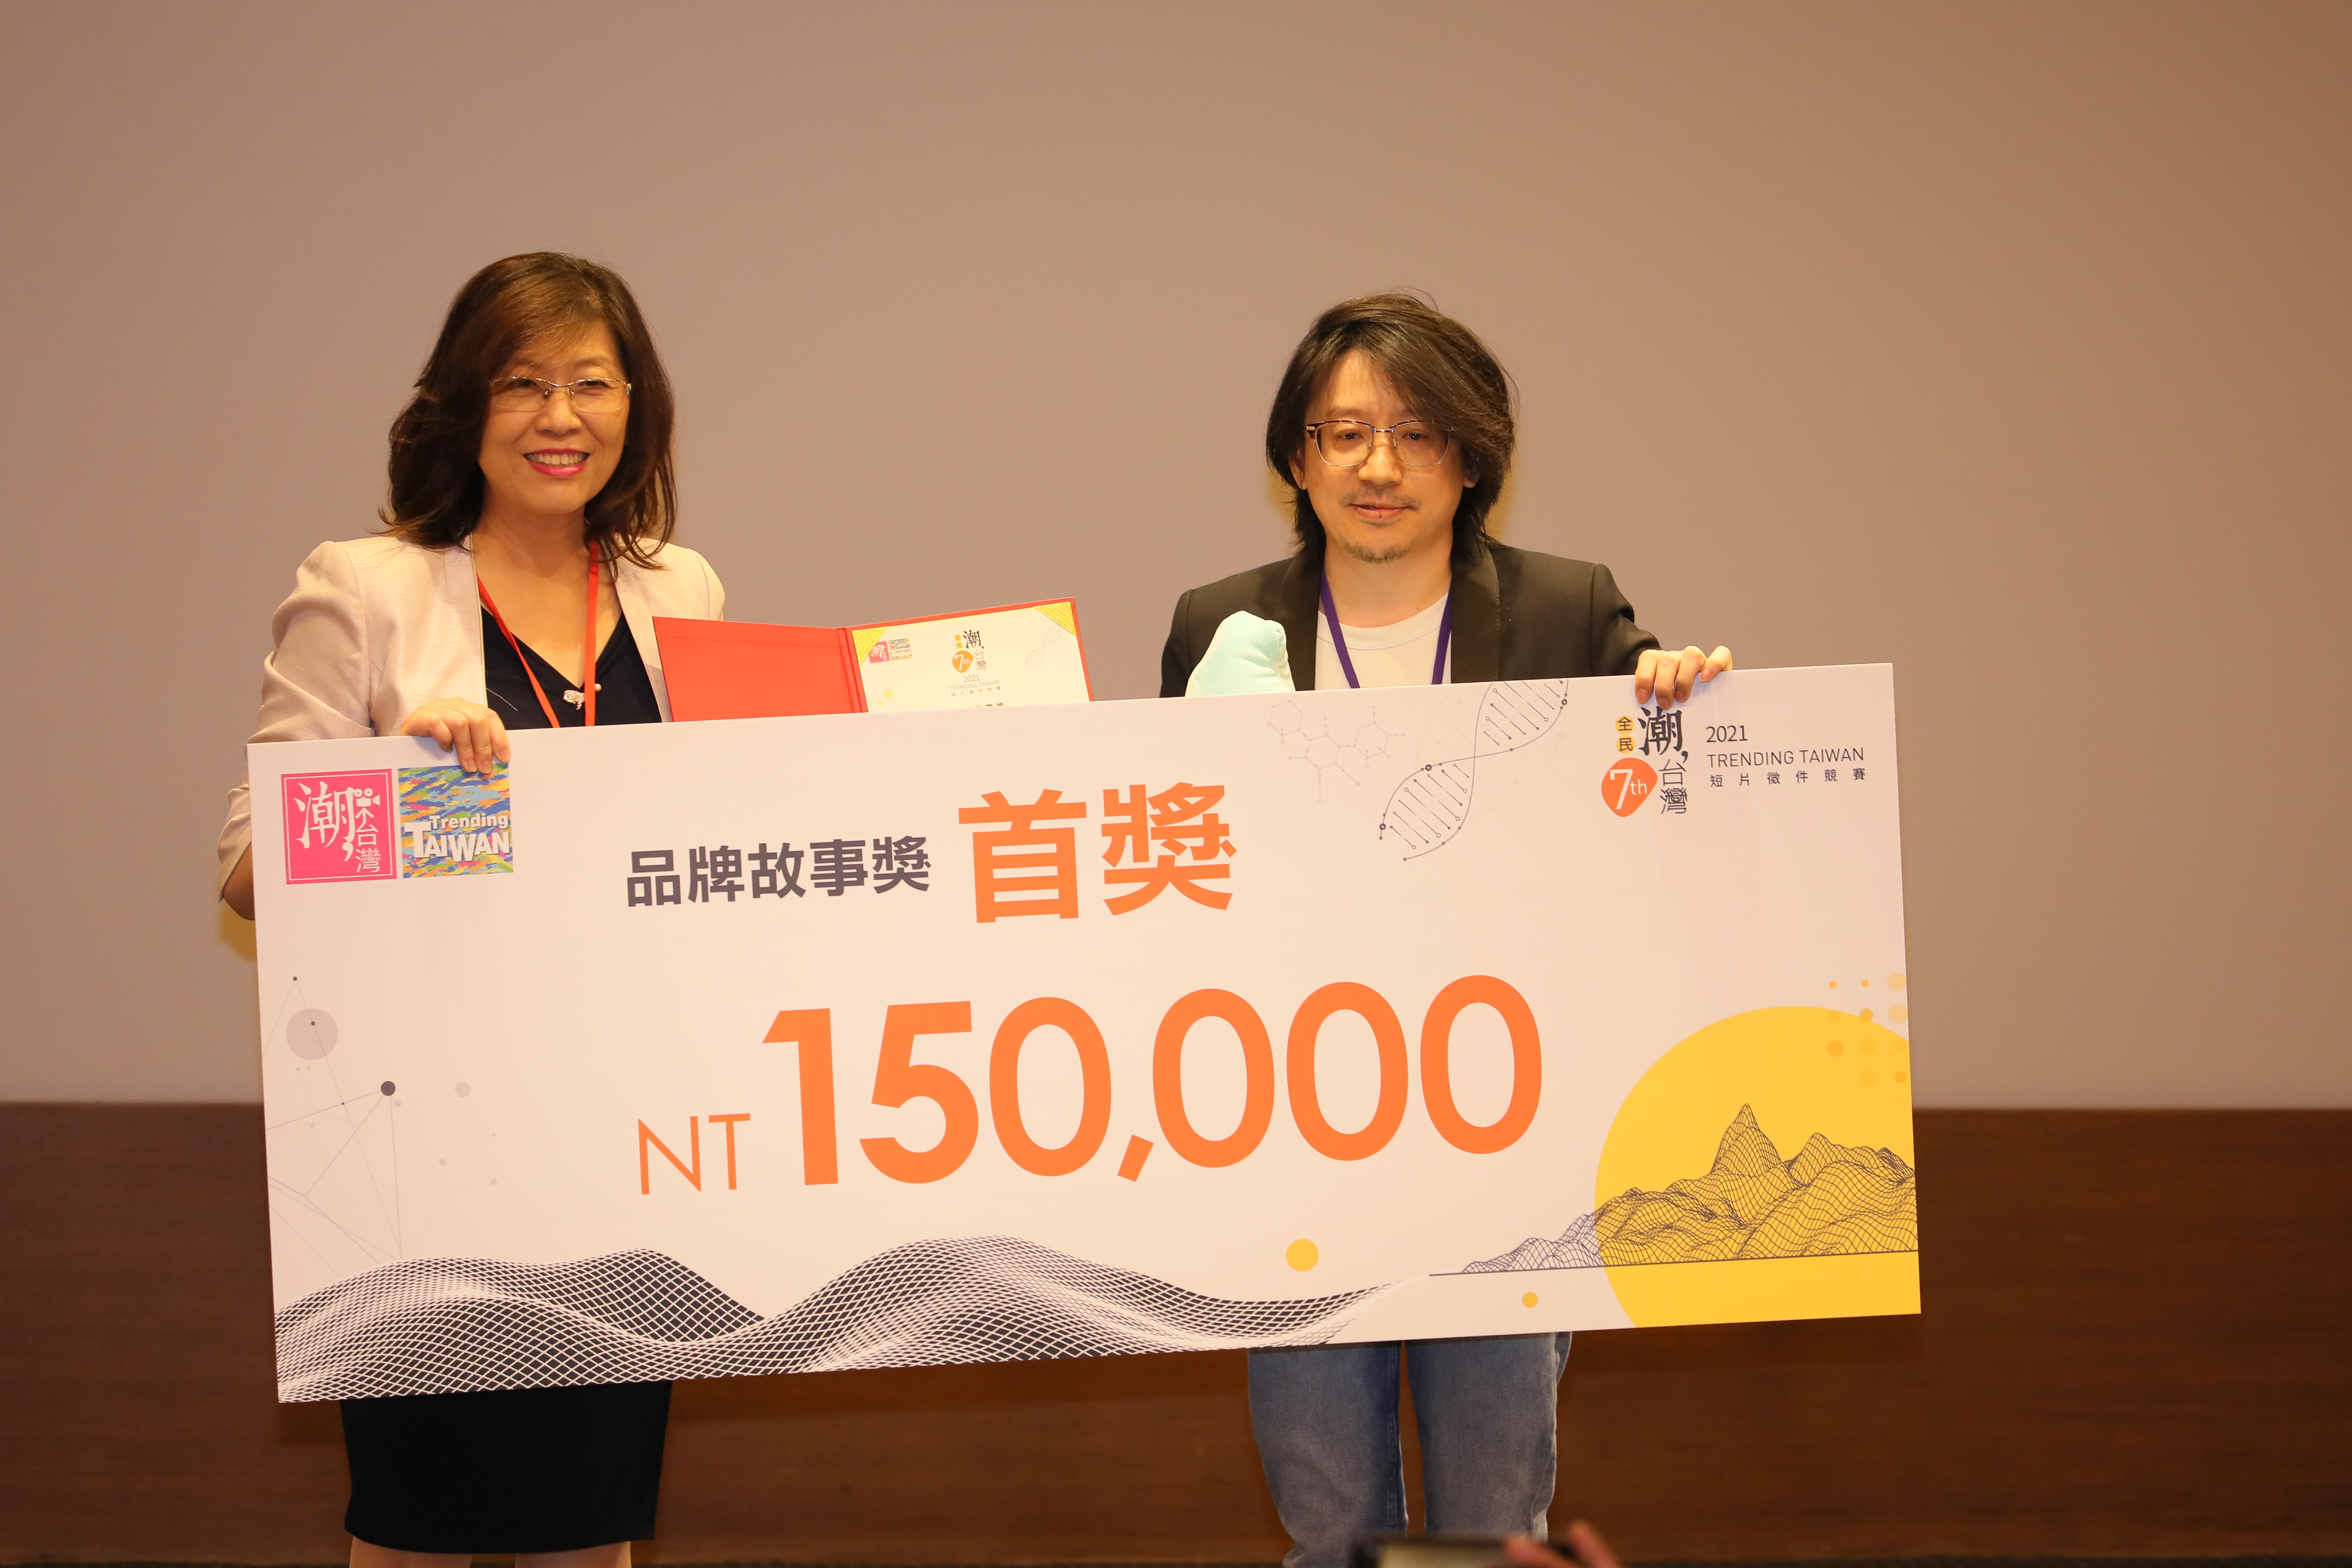 The Director-general of Department of International Communication, MFA, Xu Yong Mei (徐詠梅), presented the first prize of ‘Brand Story Award’ worth NT$150,000 to the winner.